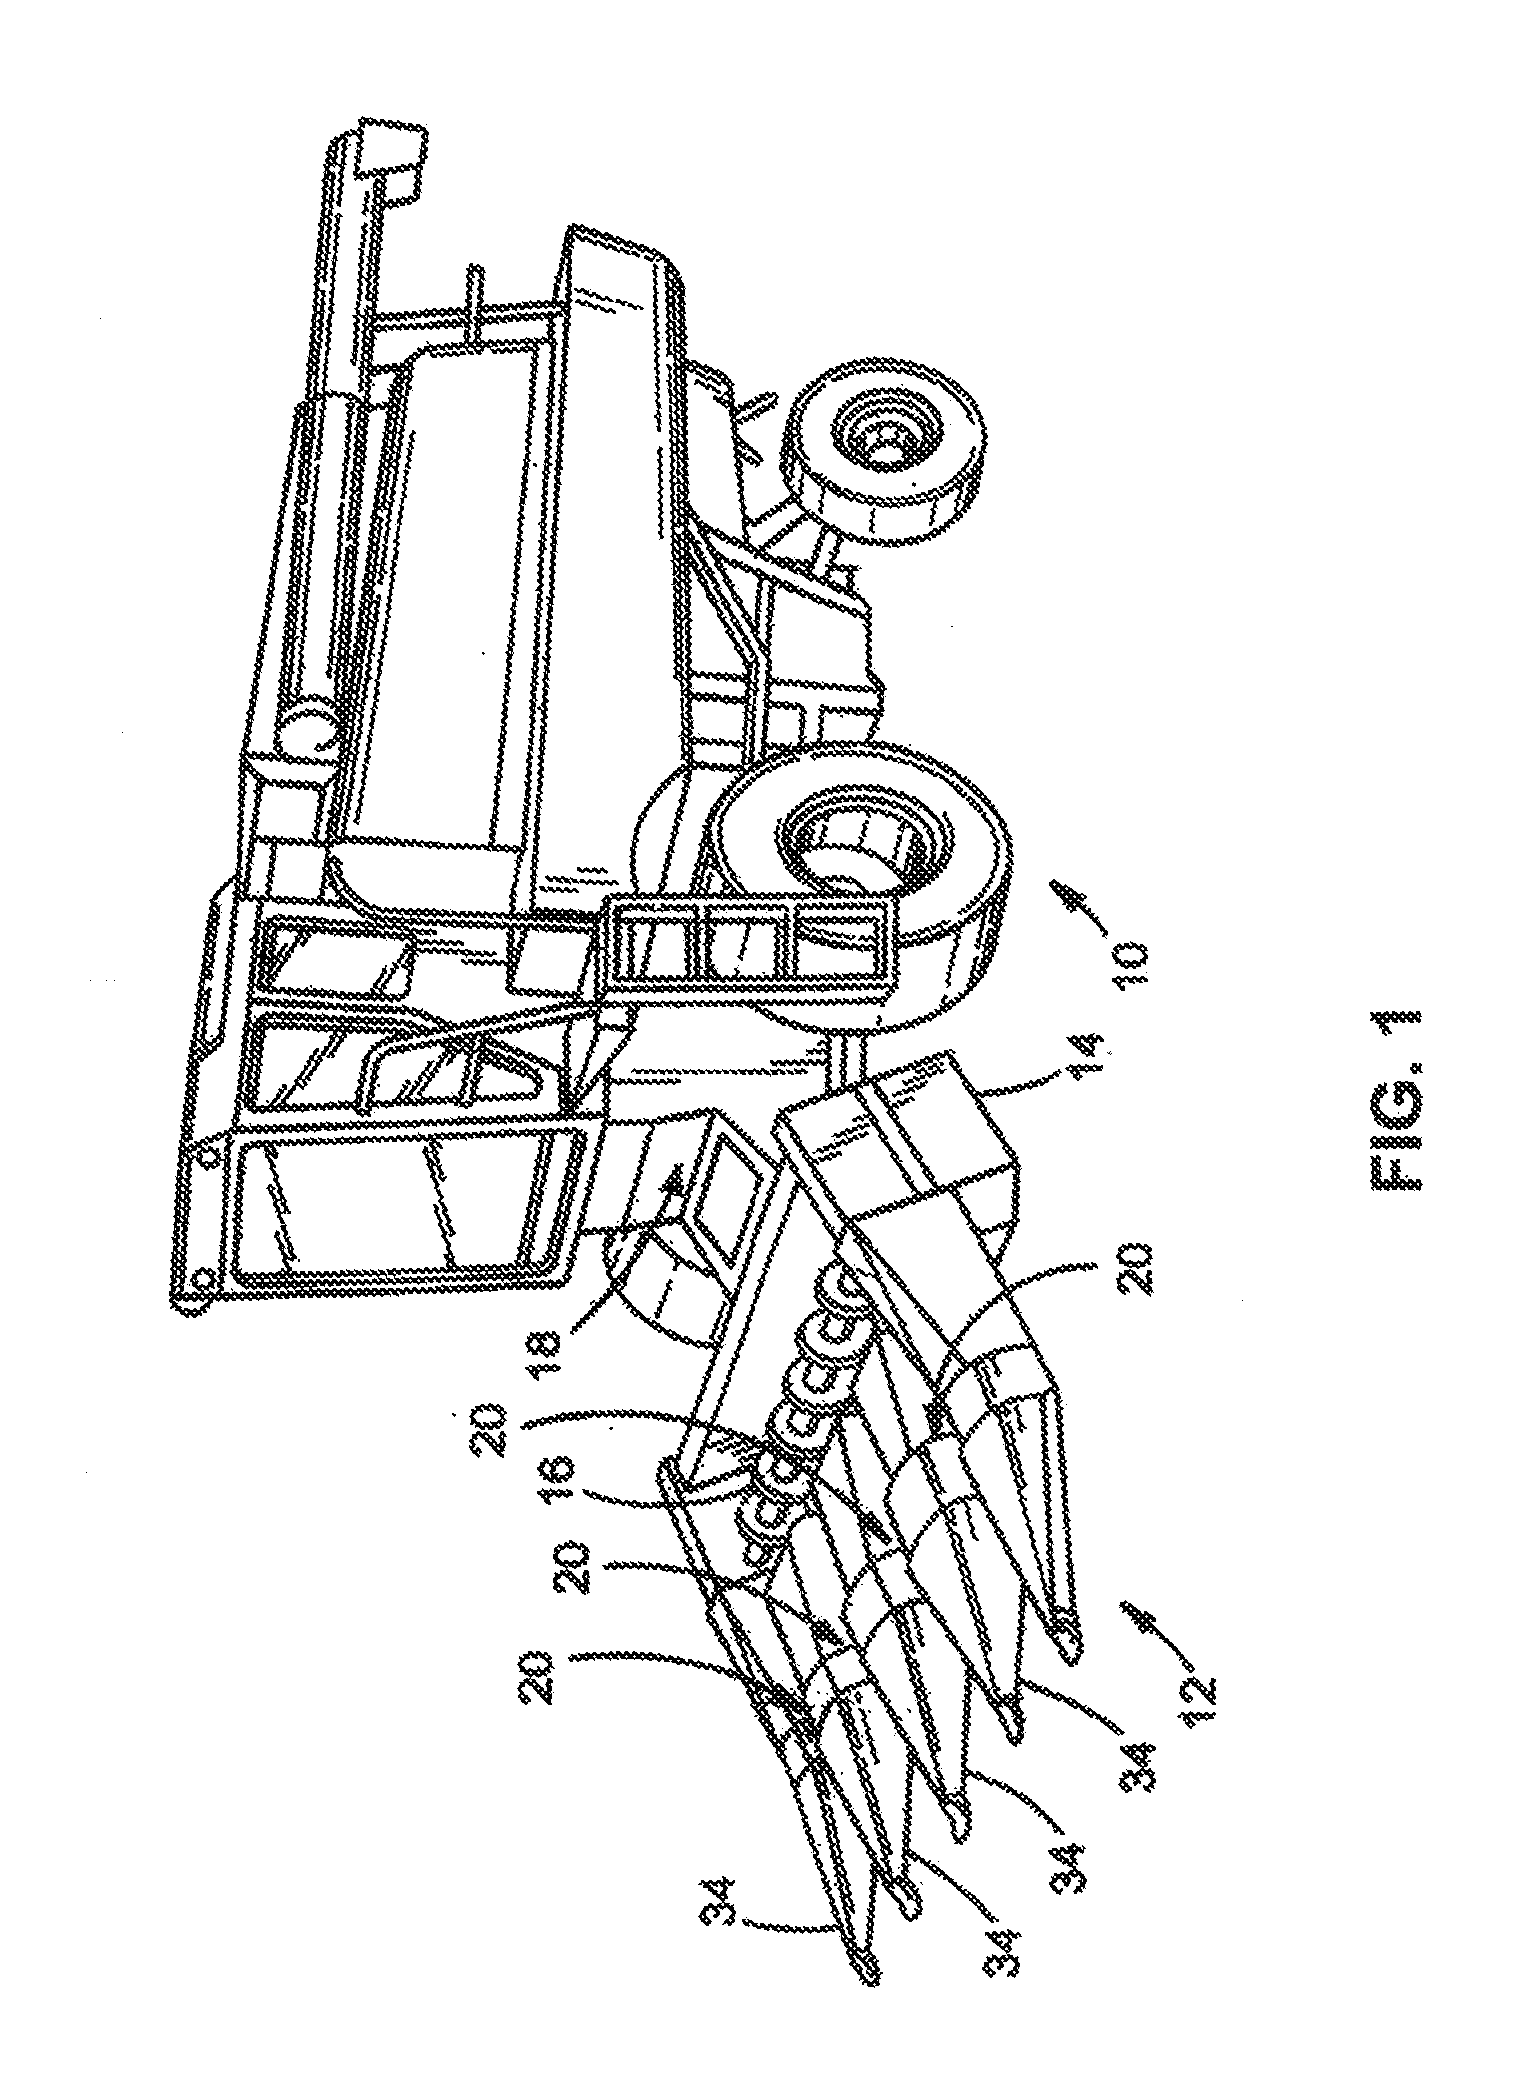 Adjustable row unit deck plate for a header of an agricultural harvester